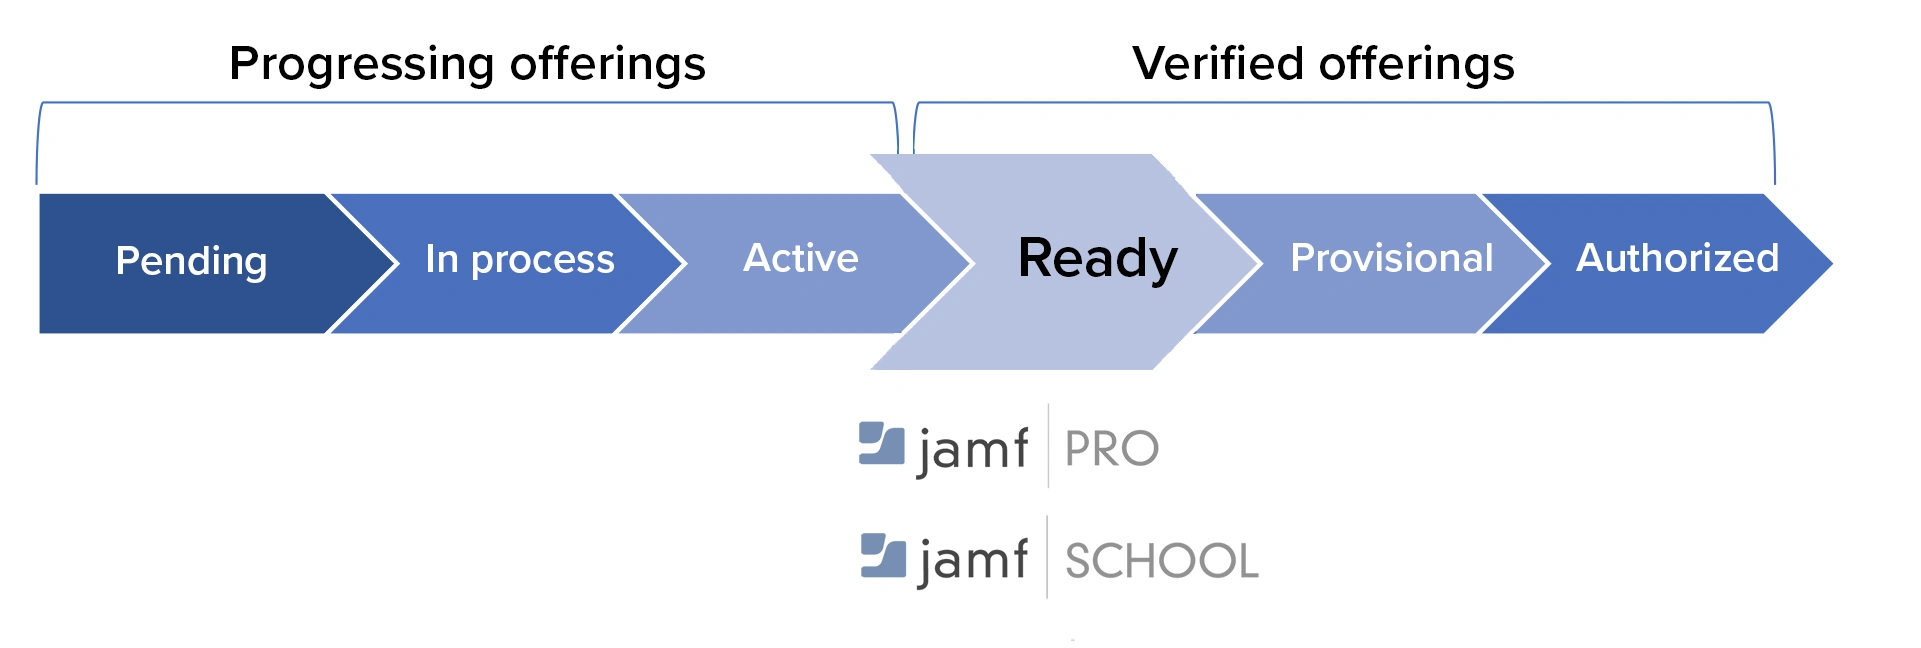 Diagram shows: Progressing offerings Pending | In process | Active Verified offerings Ready | Provisional | Authorized